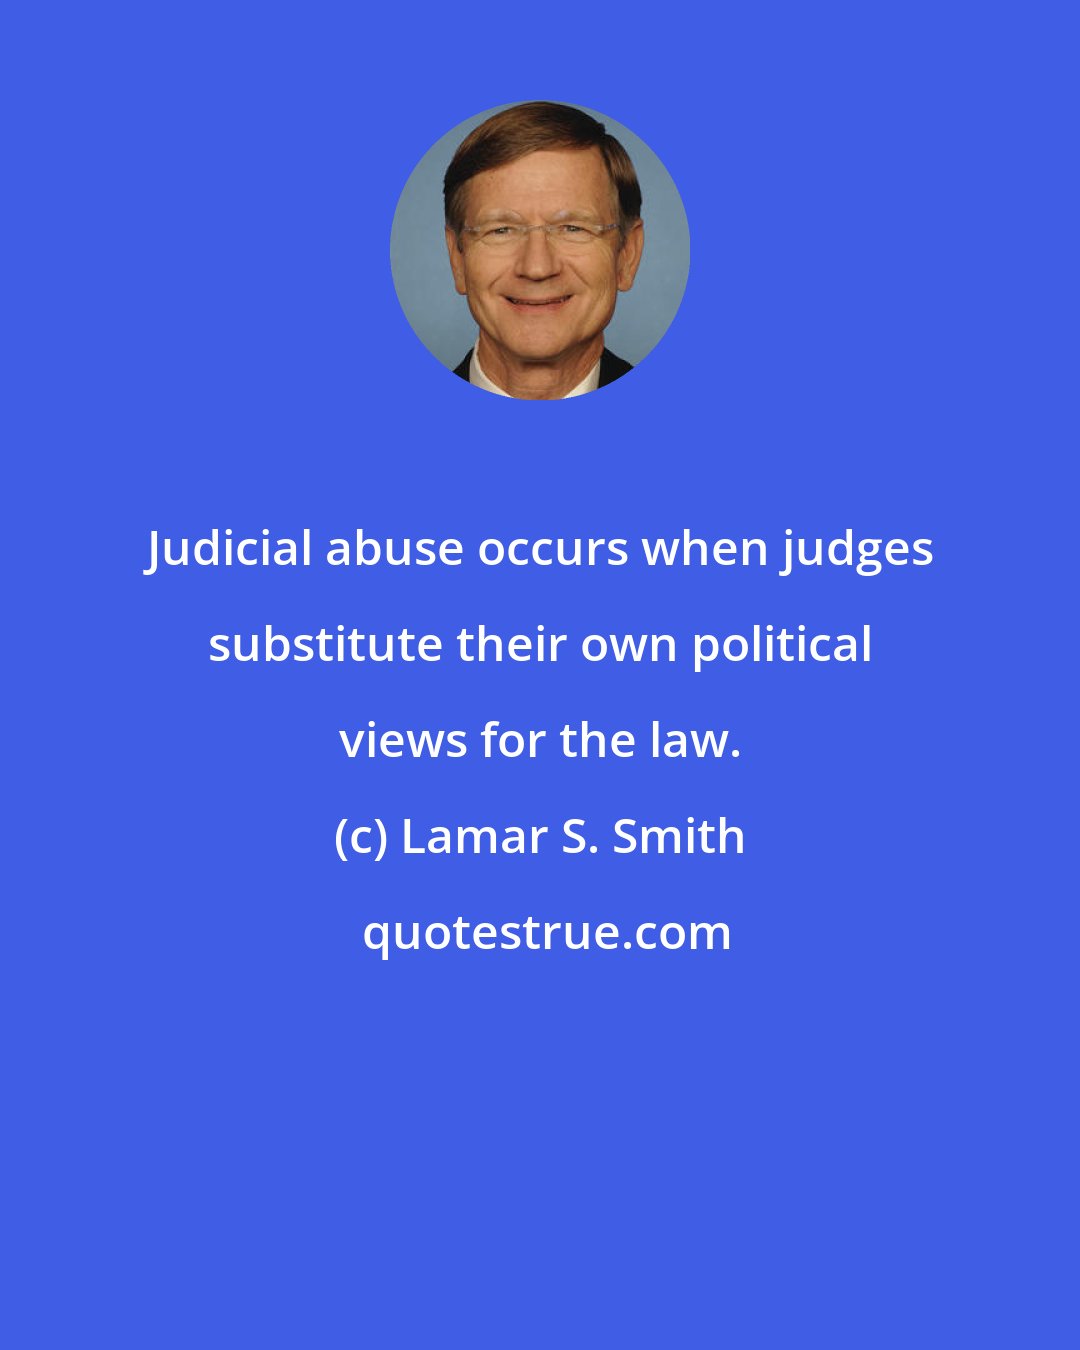 Lamar S. Smith: Judicial abuse occurs when judges substitute their own political views for the law.